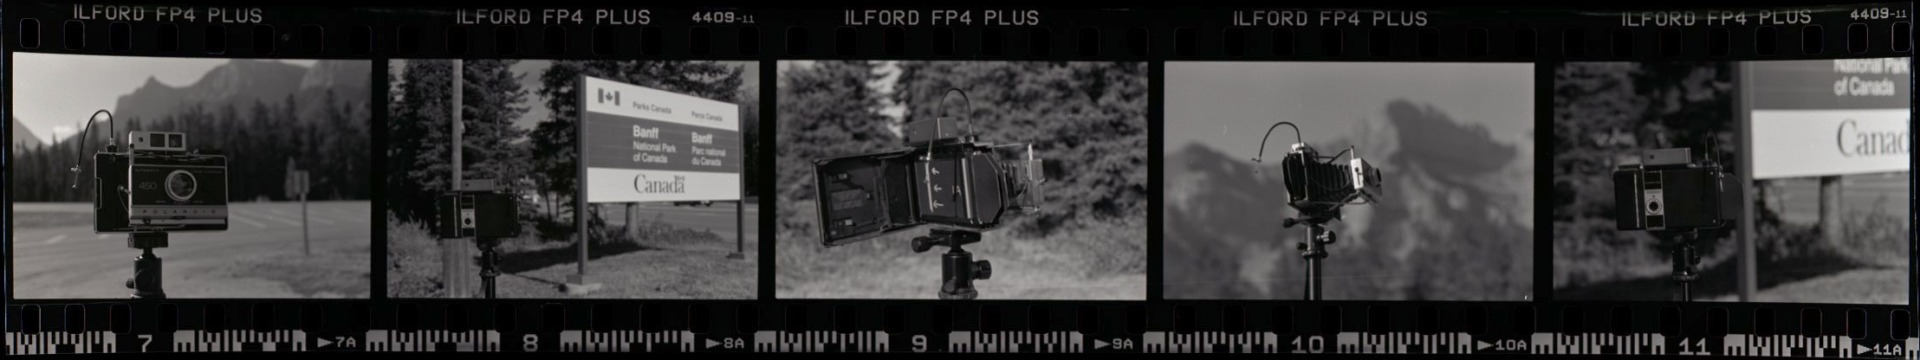 Polaroid model 450 from the 1960s, using photographic paper as negatives